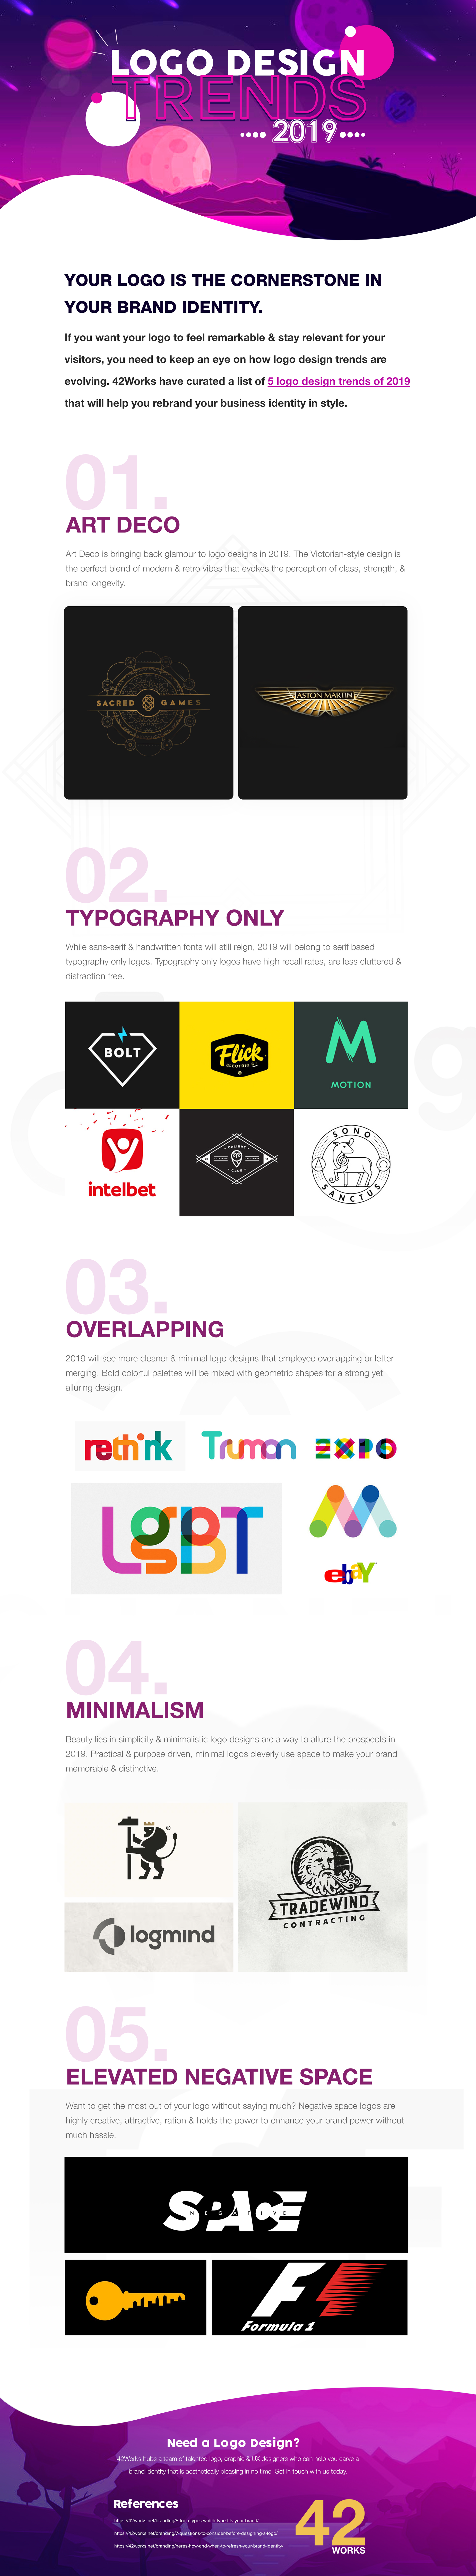 Logo Design Trends 2019 [Infographic] by 42works